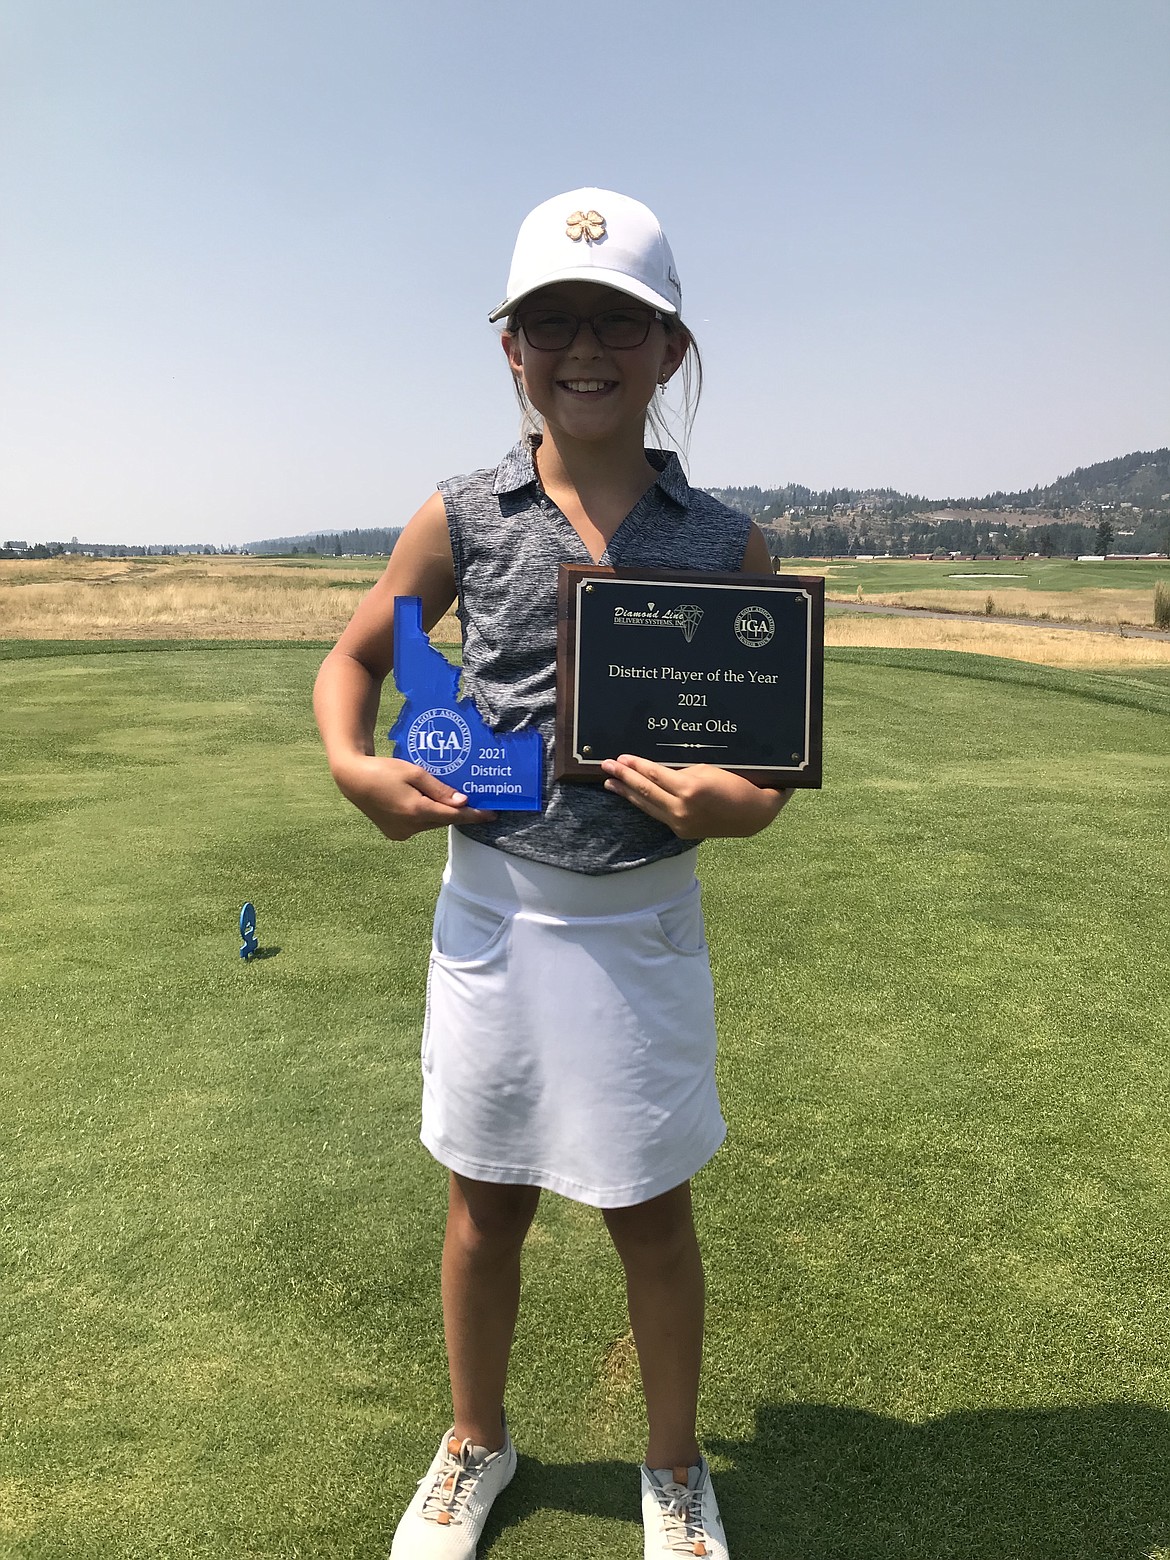 Courtesy photo
Avery Wilson of Hayden Lake was awarded Player of the Year honors in the girls age 8-9 division following the Idaho Golf Association district championships which concluded Tuesday at The Links Golf Club in Post Falls.